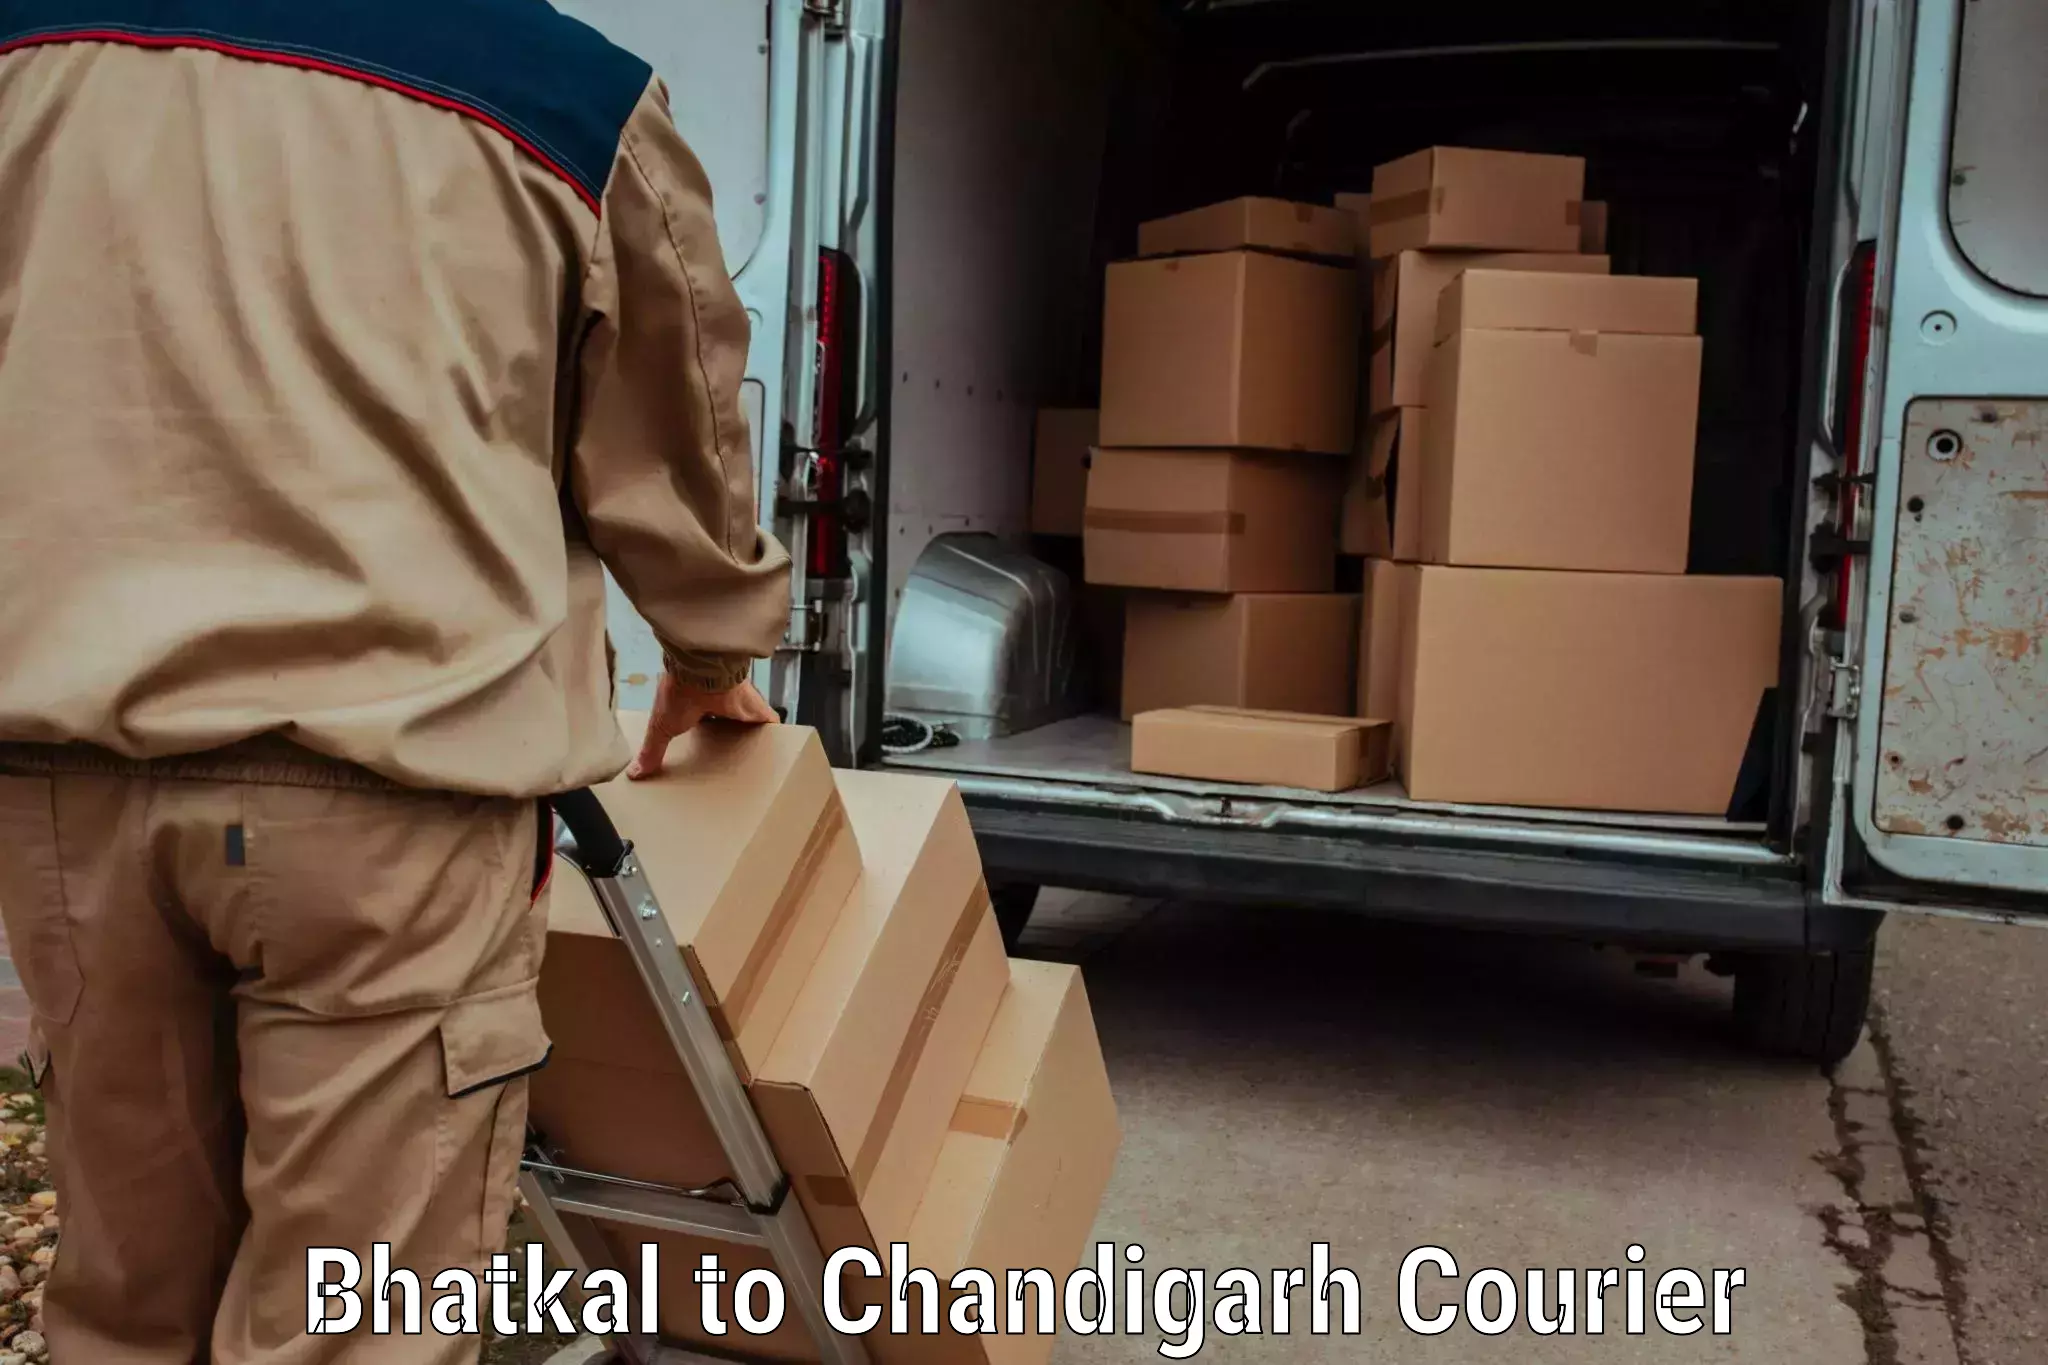 User-friendly delivery service Bhatkal to Chandigarh